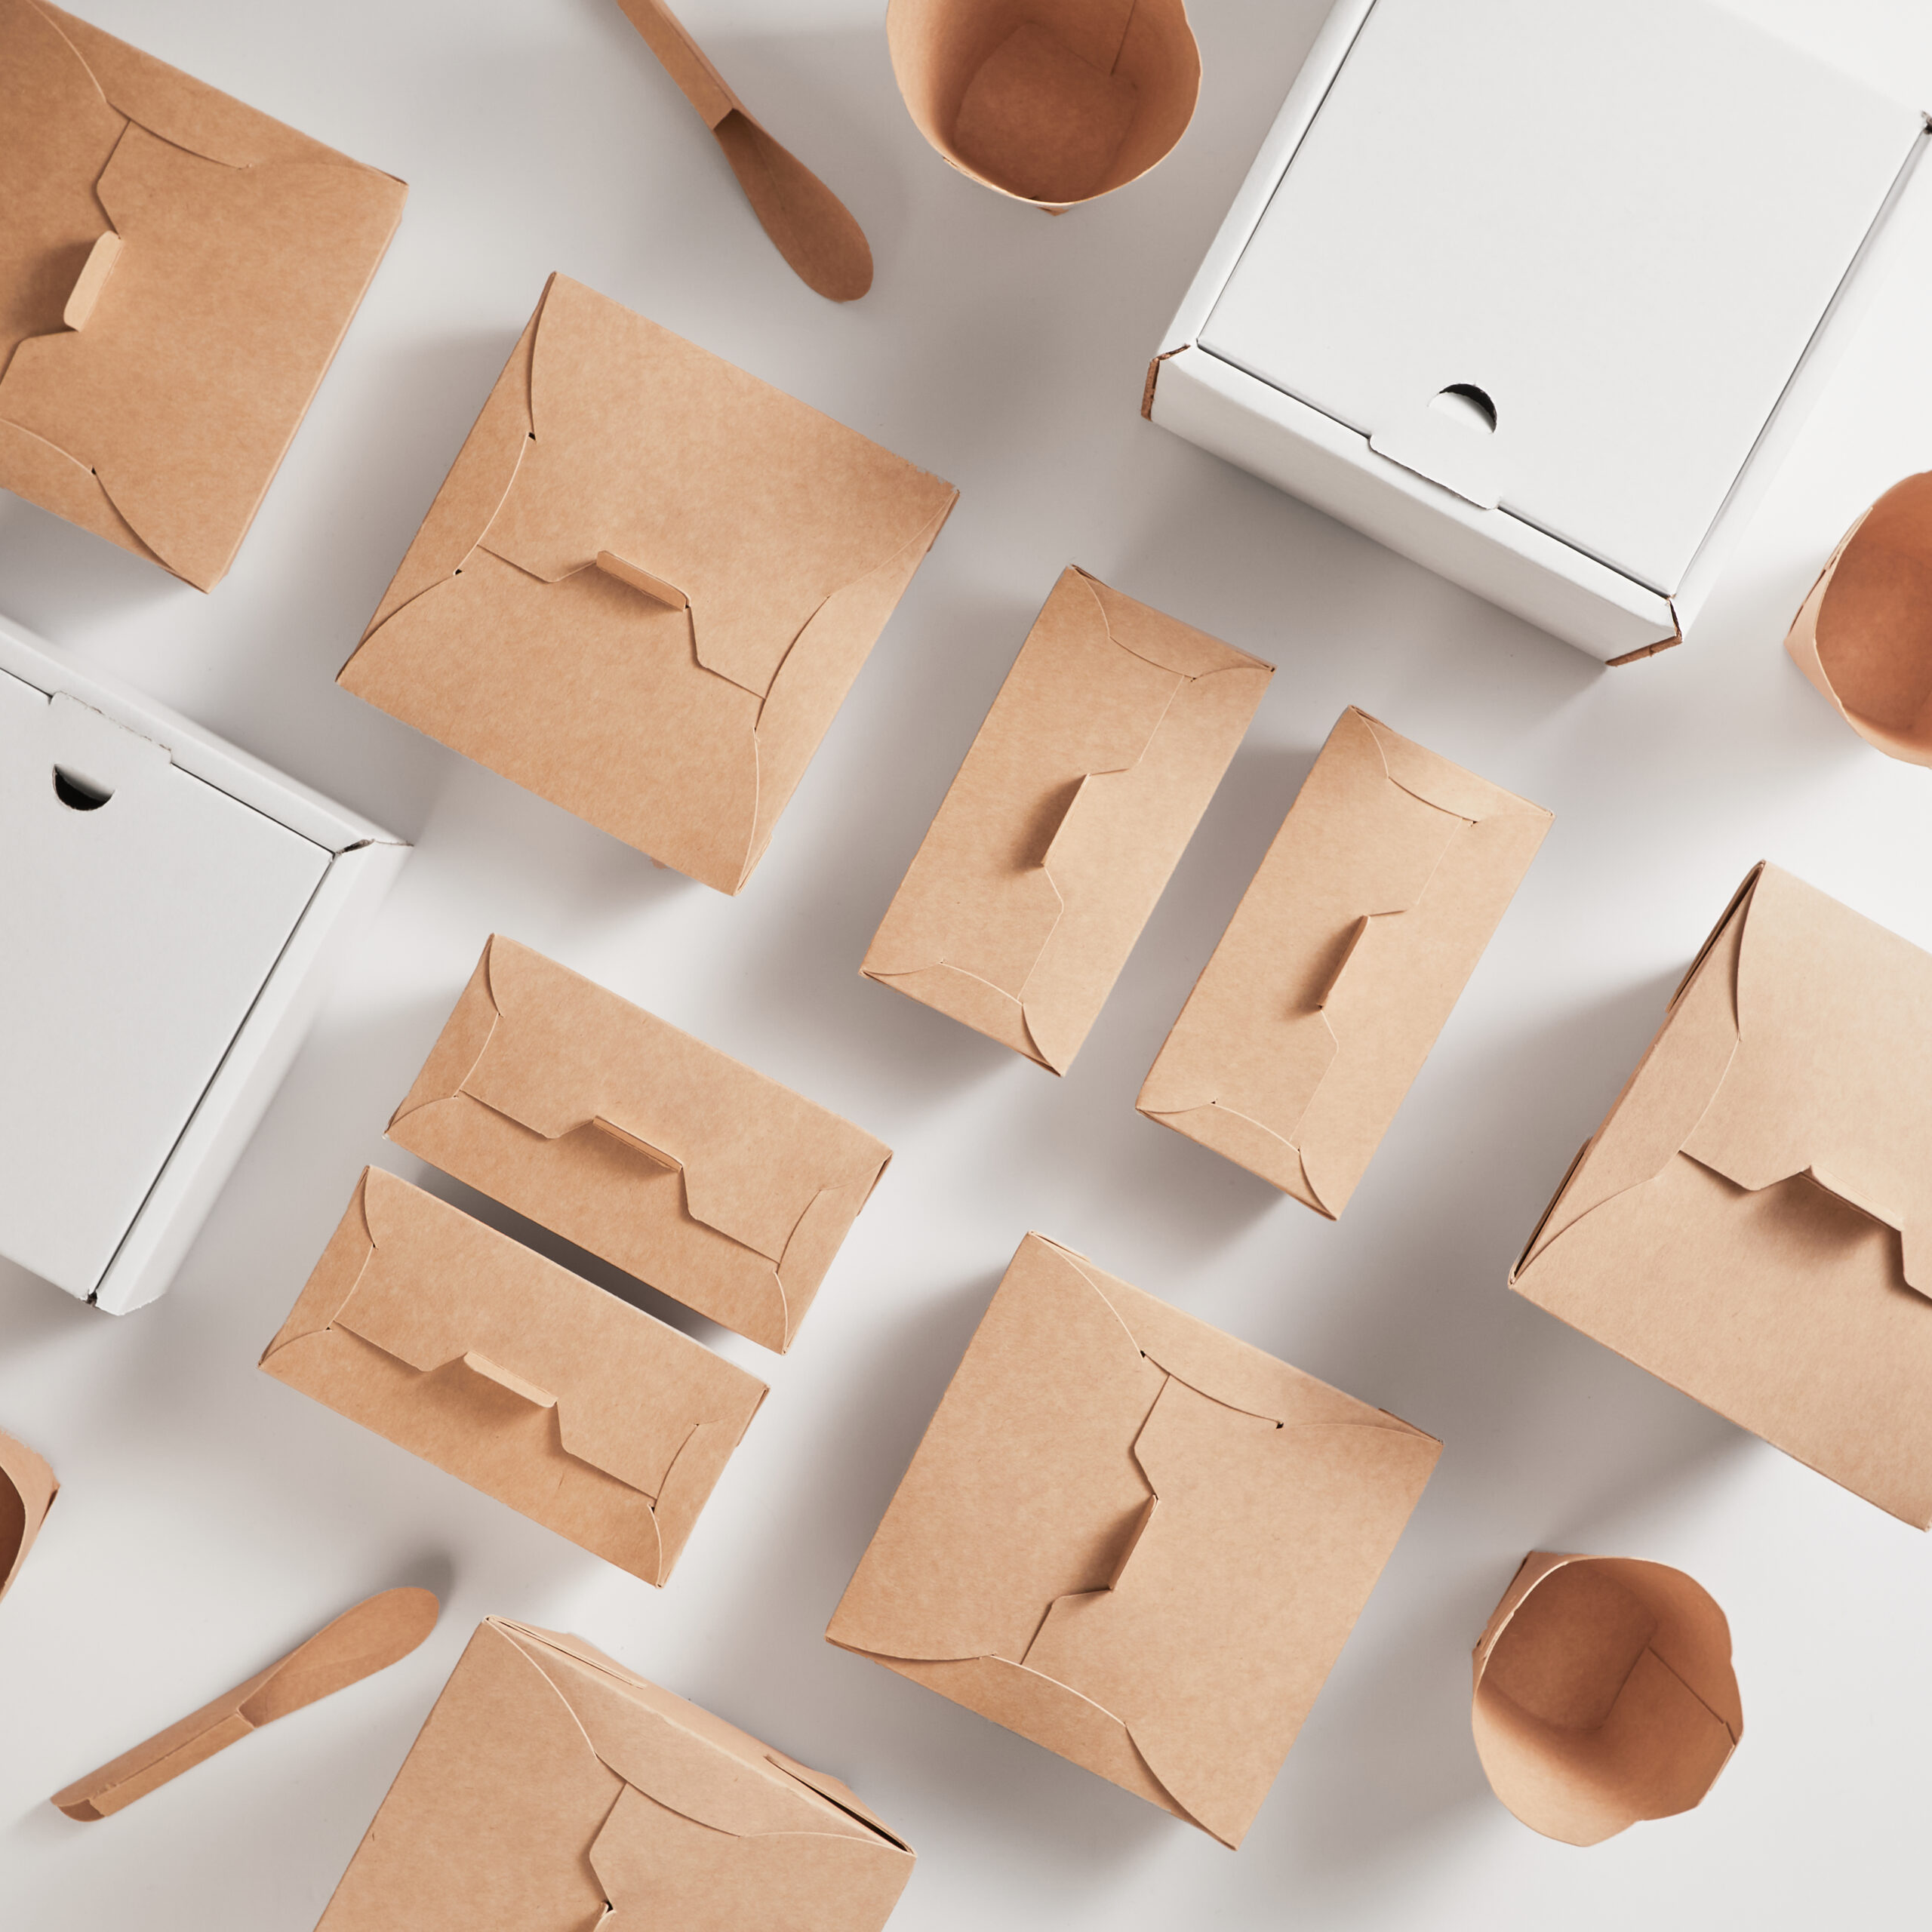 We innovate again, we launch the first biodegradable cardboard ice cream pots on the market.